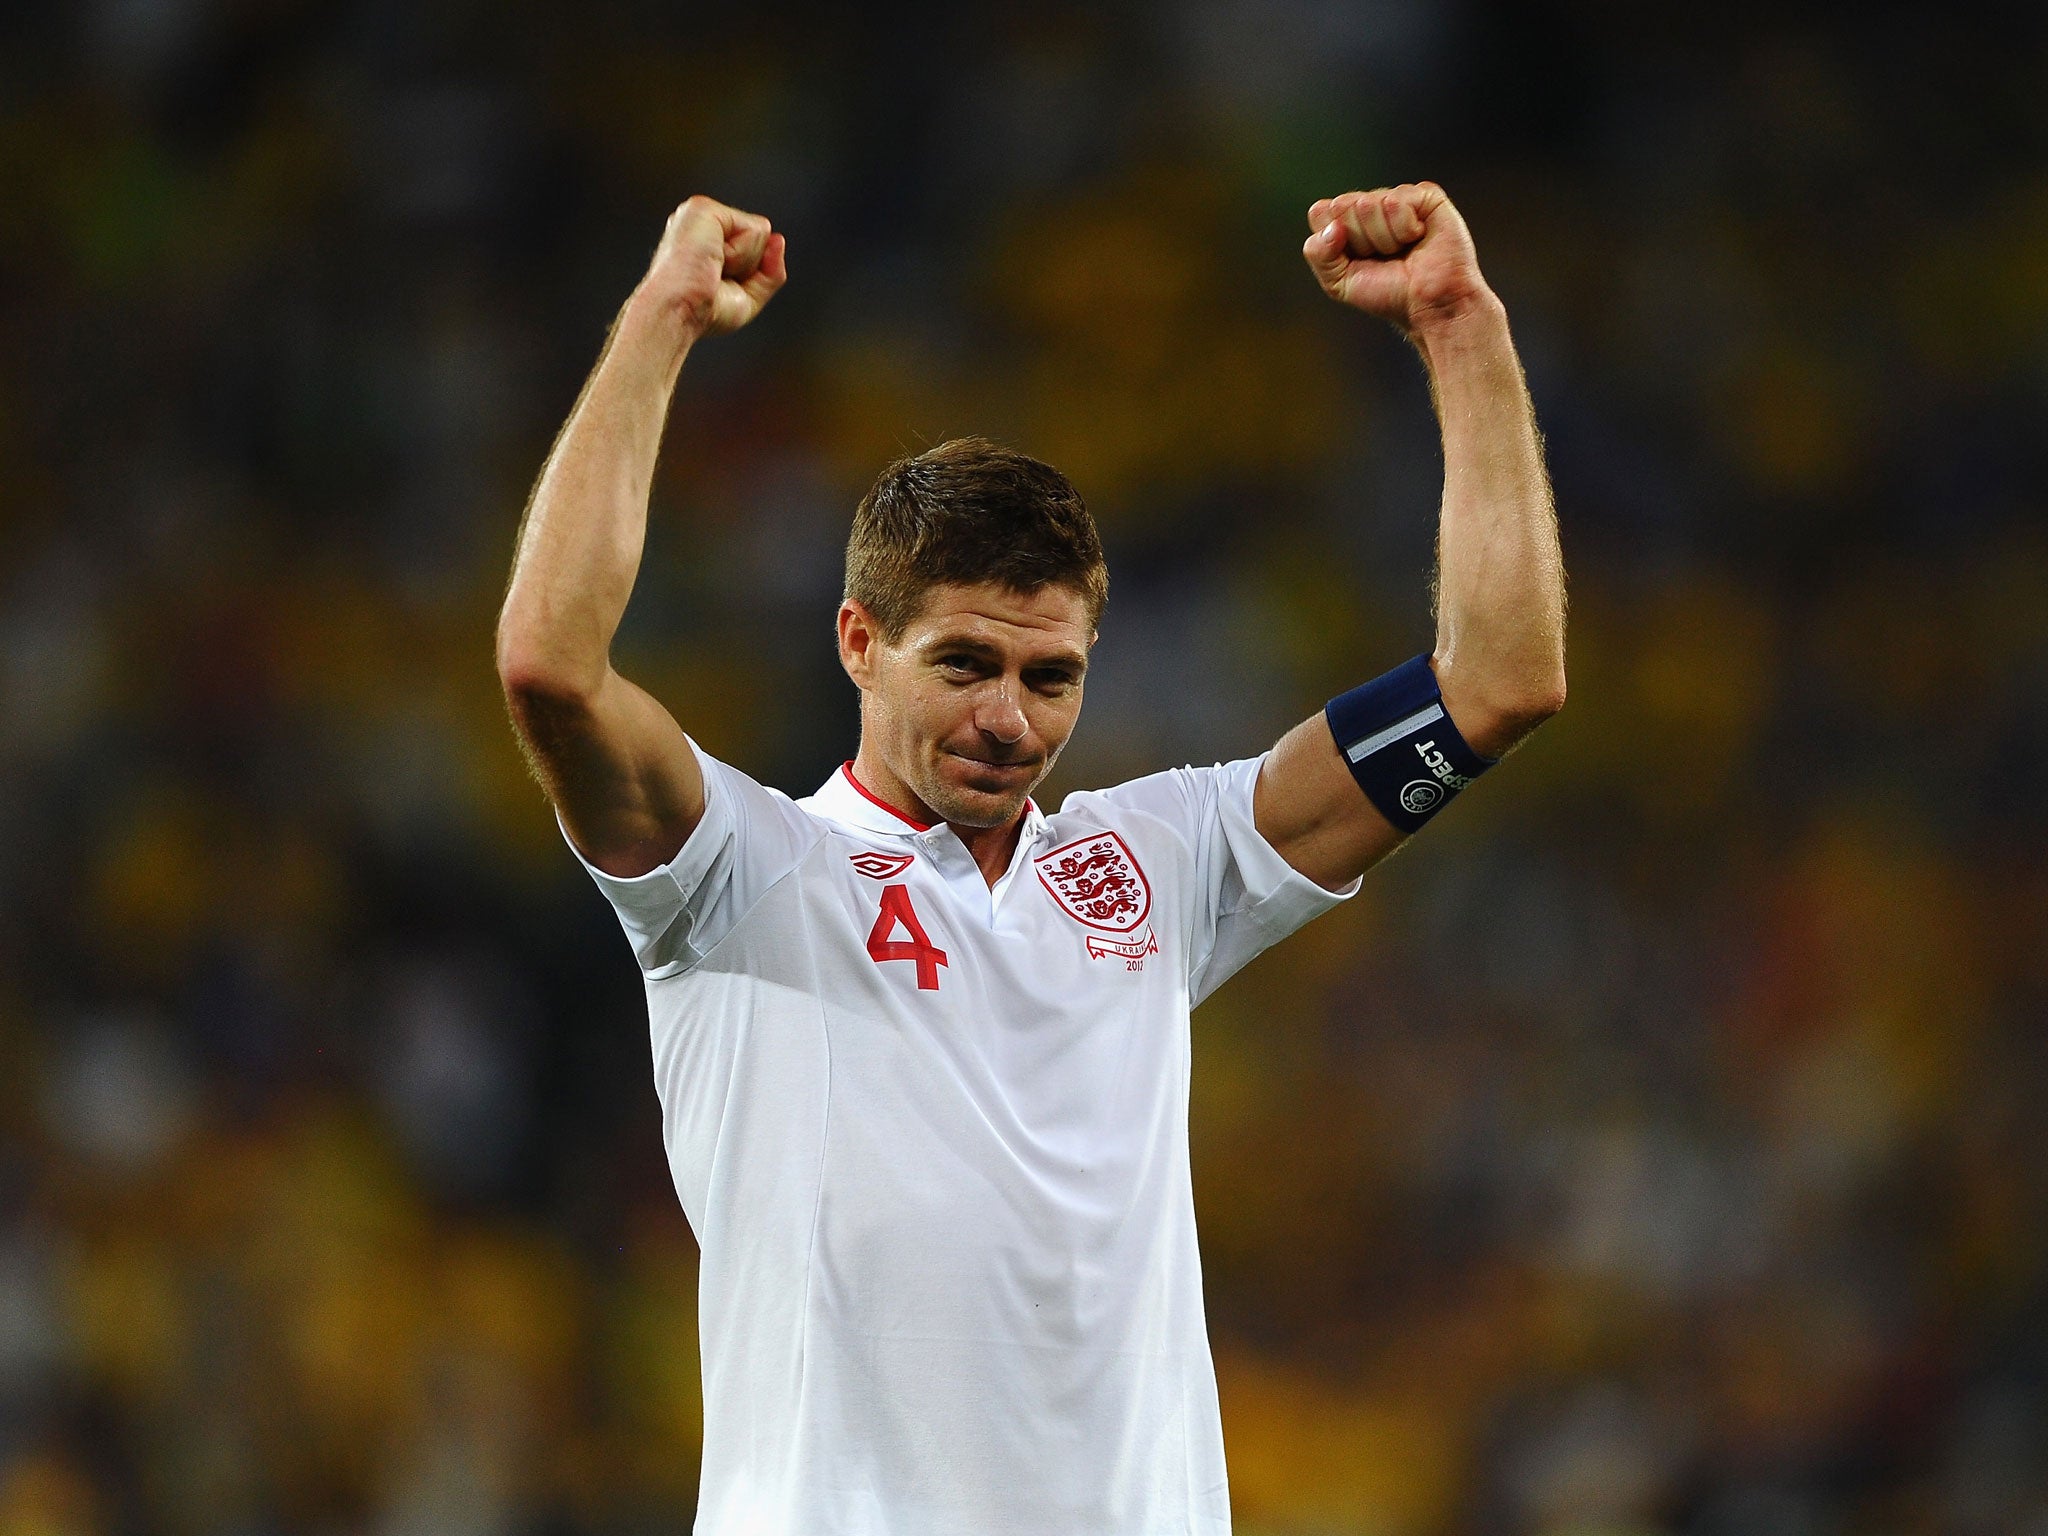 Steven Gerrard playing for England last year